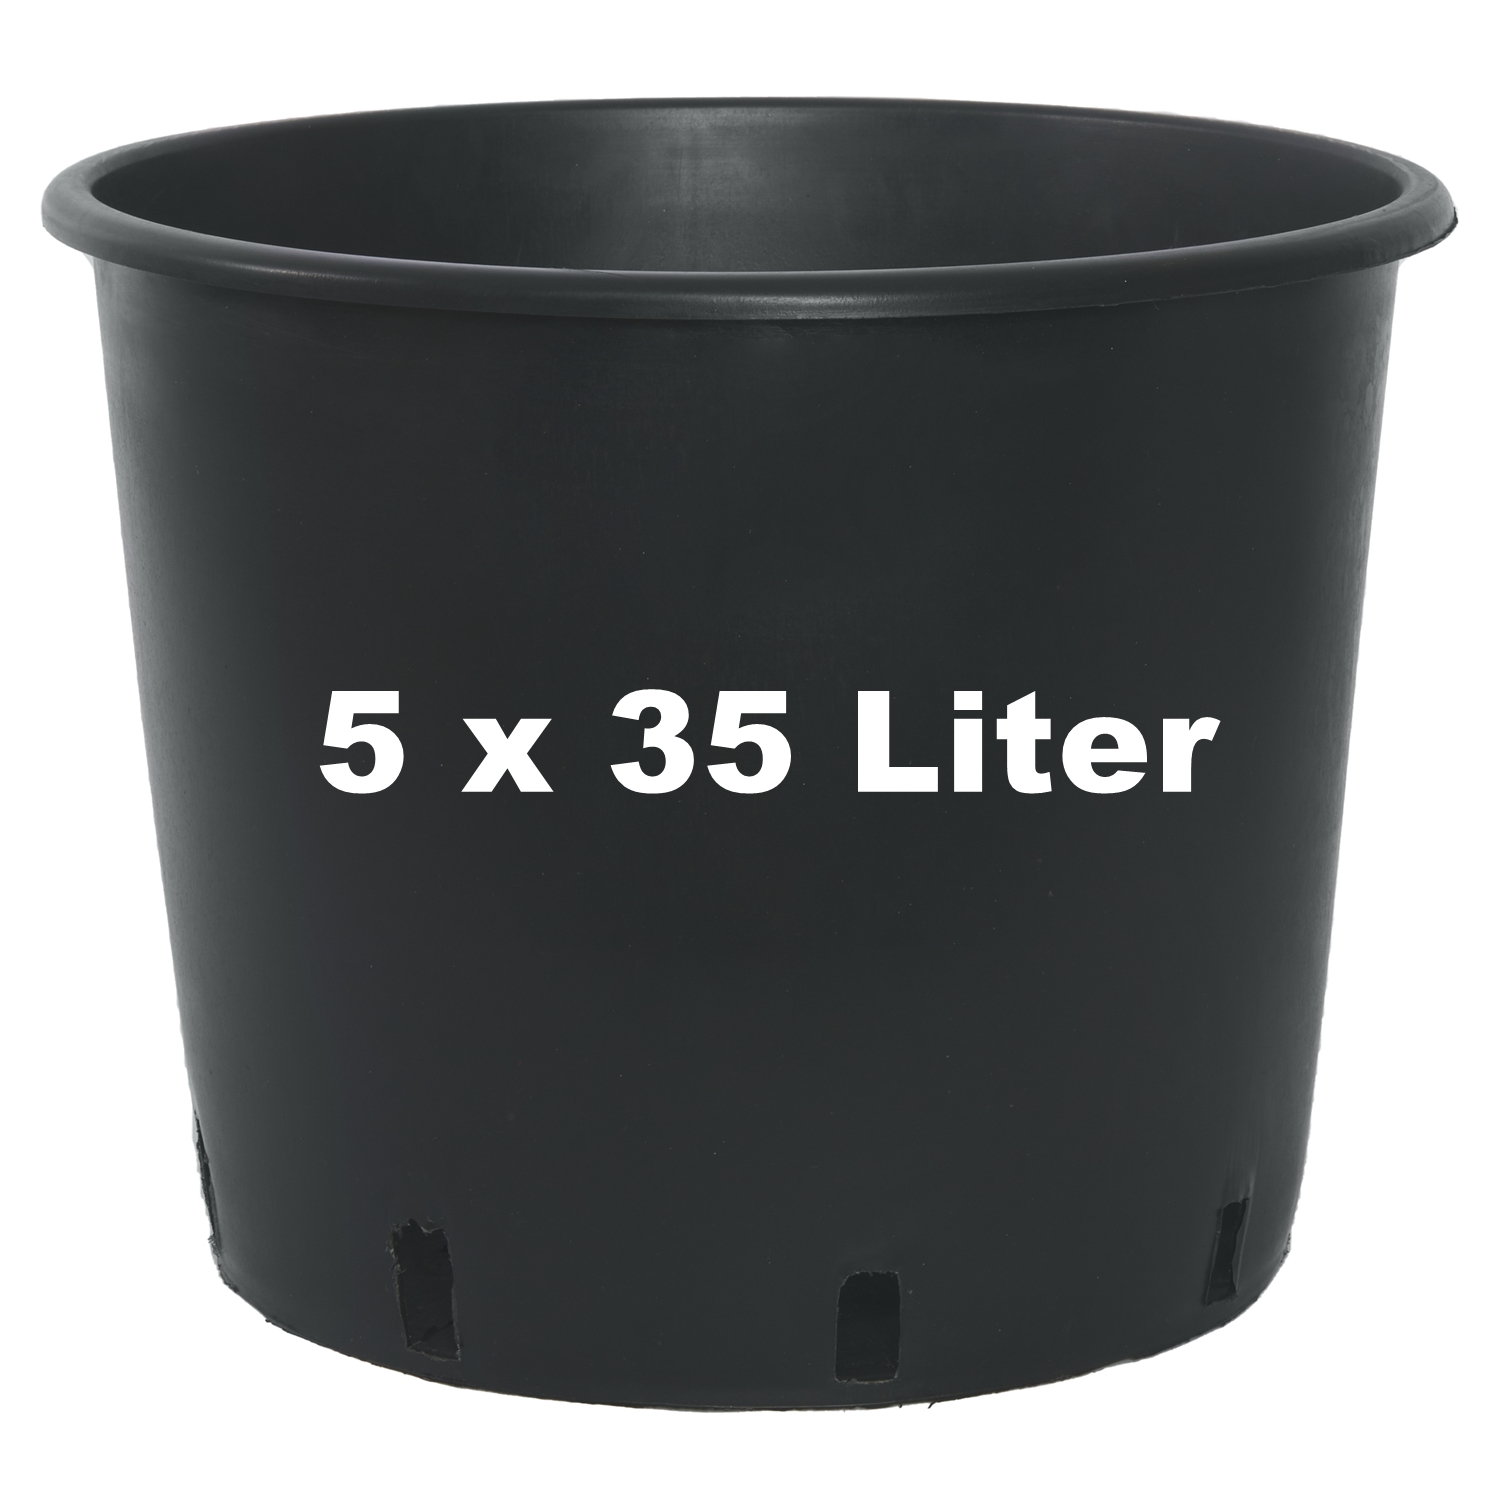 5 x Pflanzcontainer 35 Liter 2. Wahl